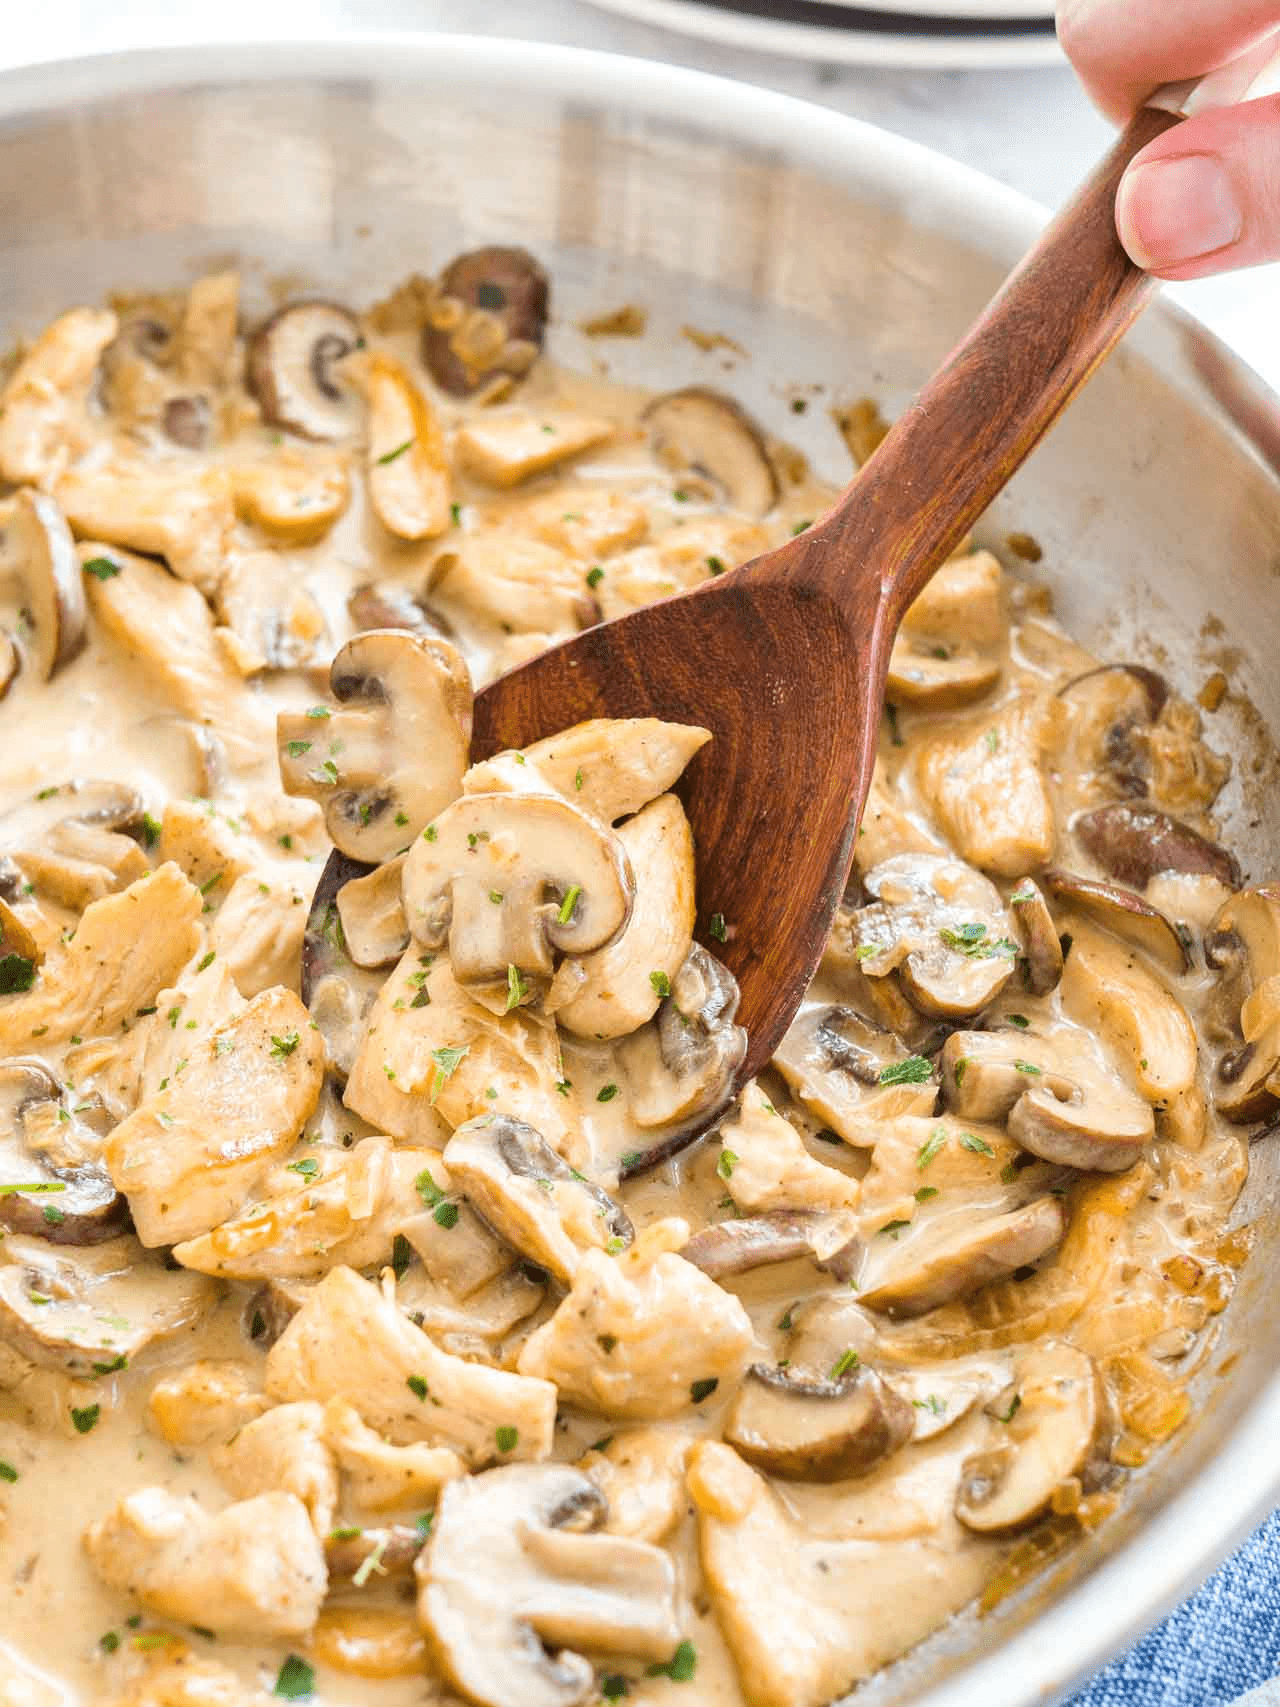 Easy, Low cost meals: chicken and mushroom pasta